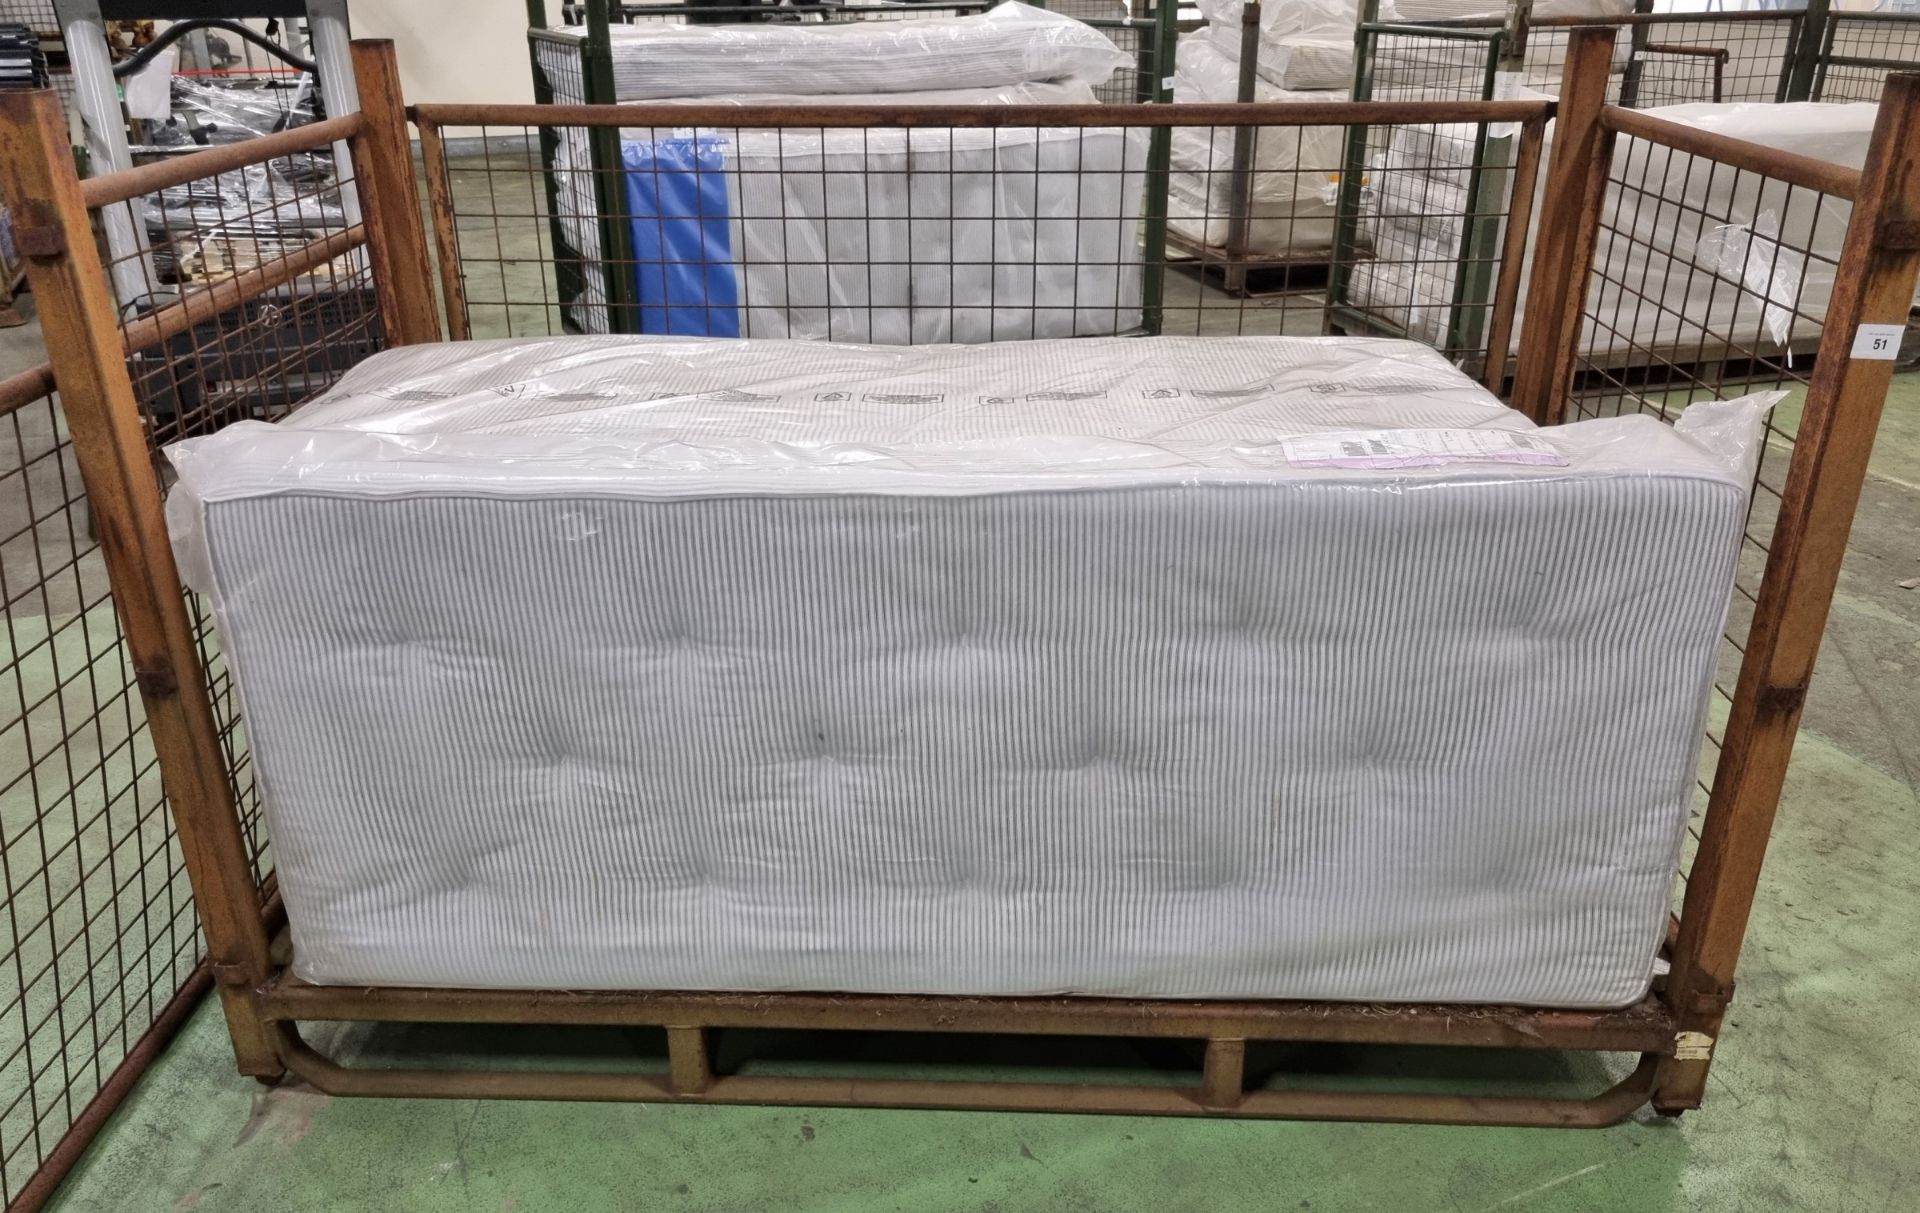 5x Black & white open coil single mattresses - discoloured due to being in storage